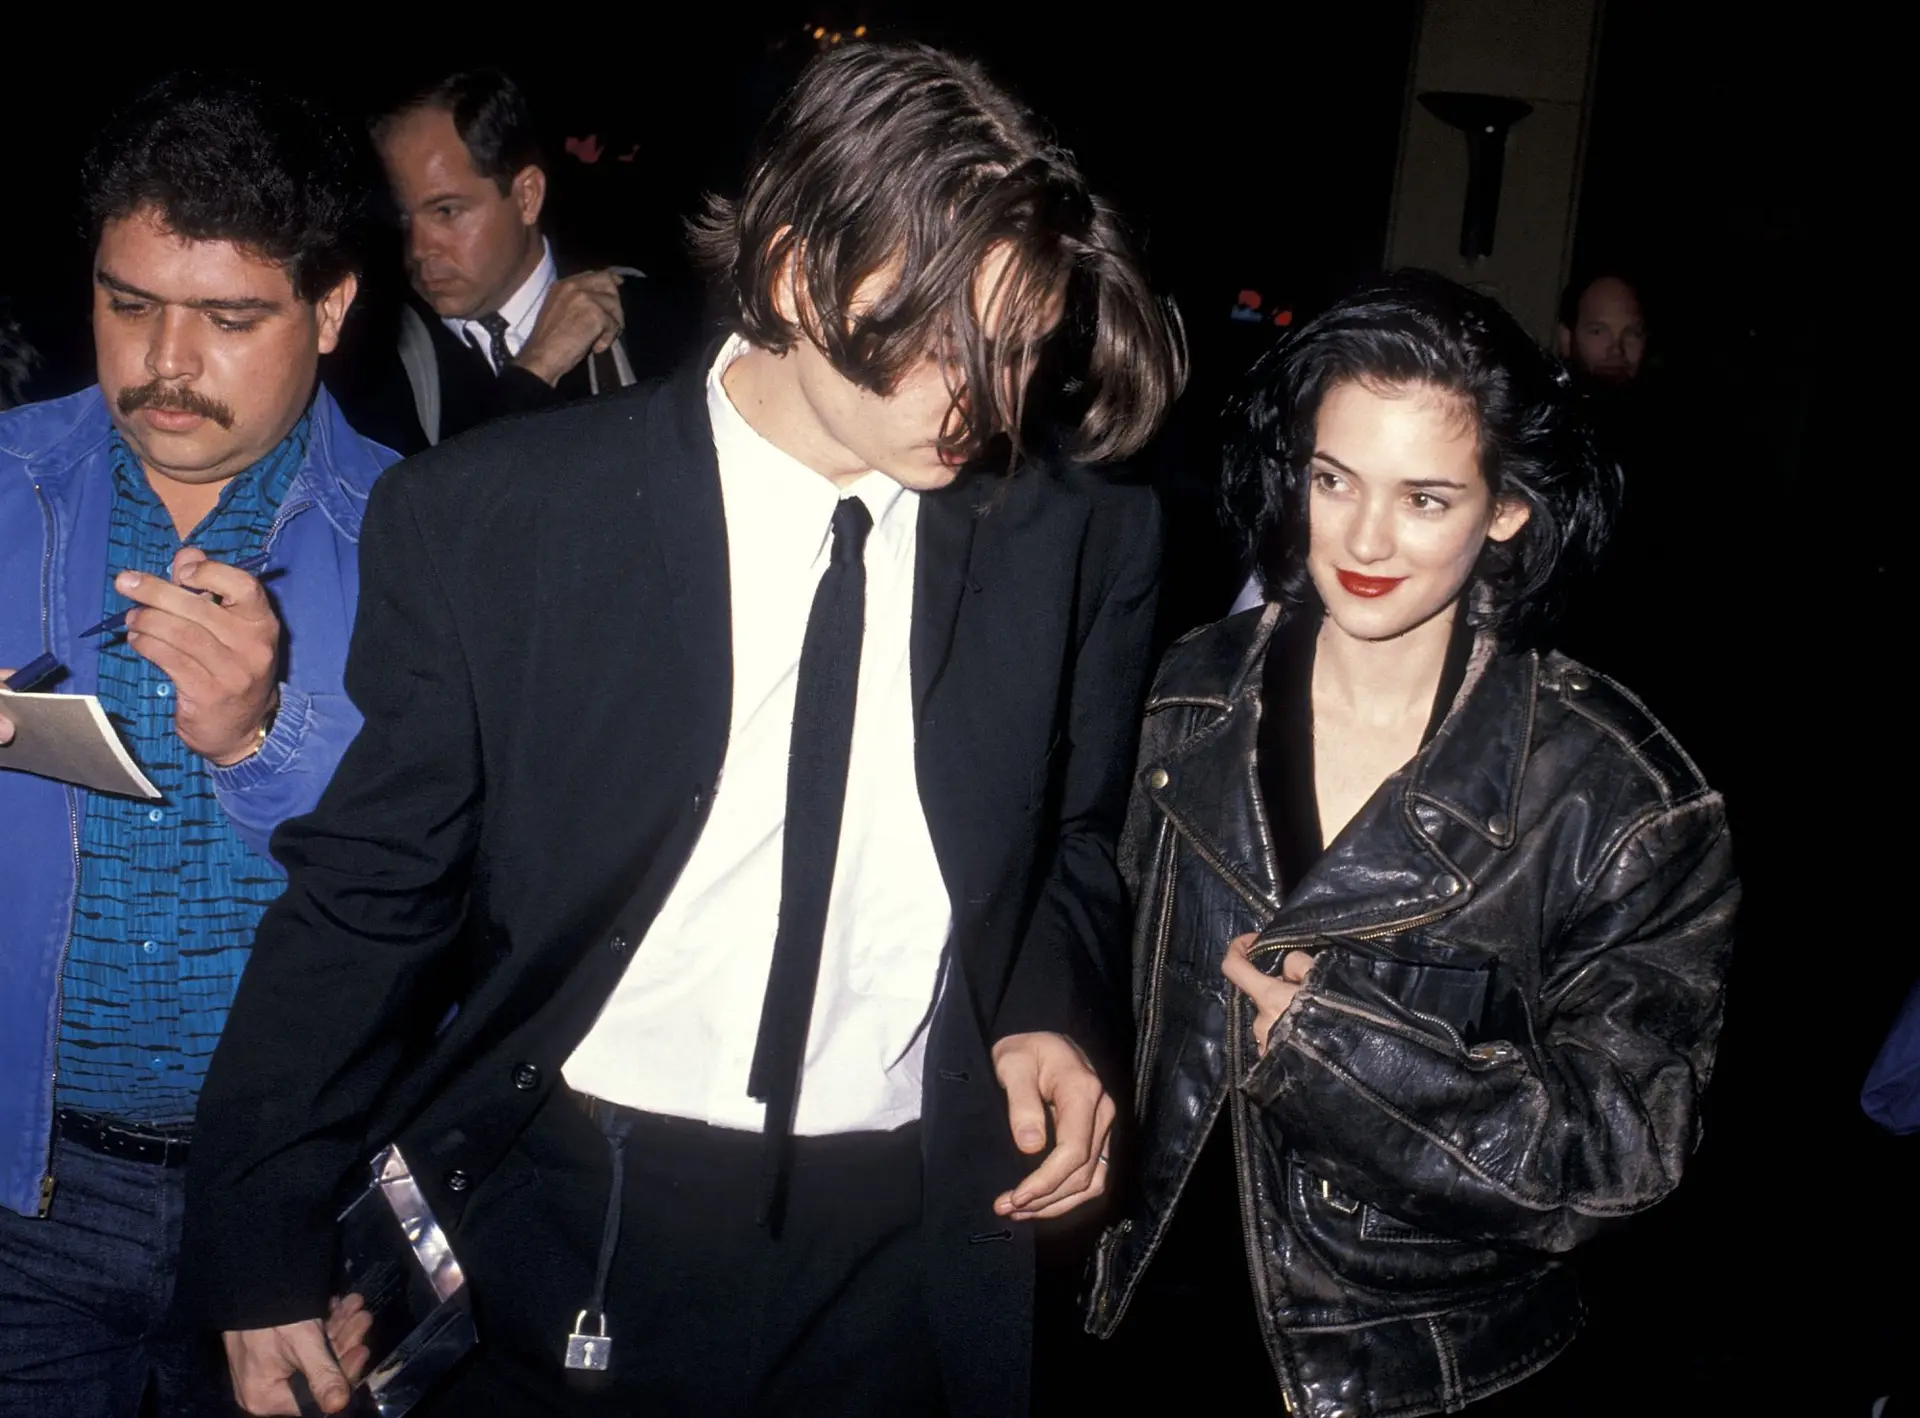 Winona Ryder 90s throwback outfits